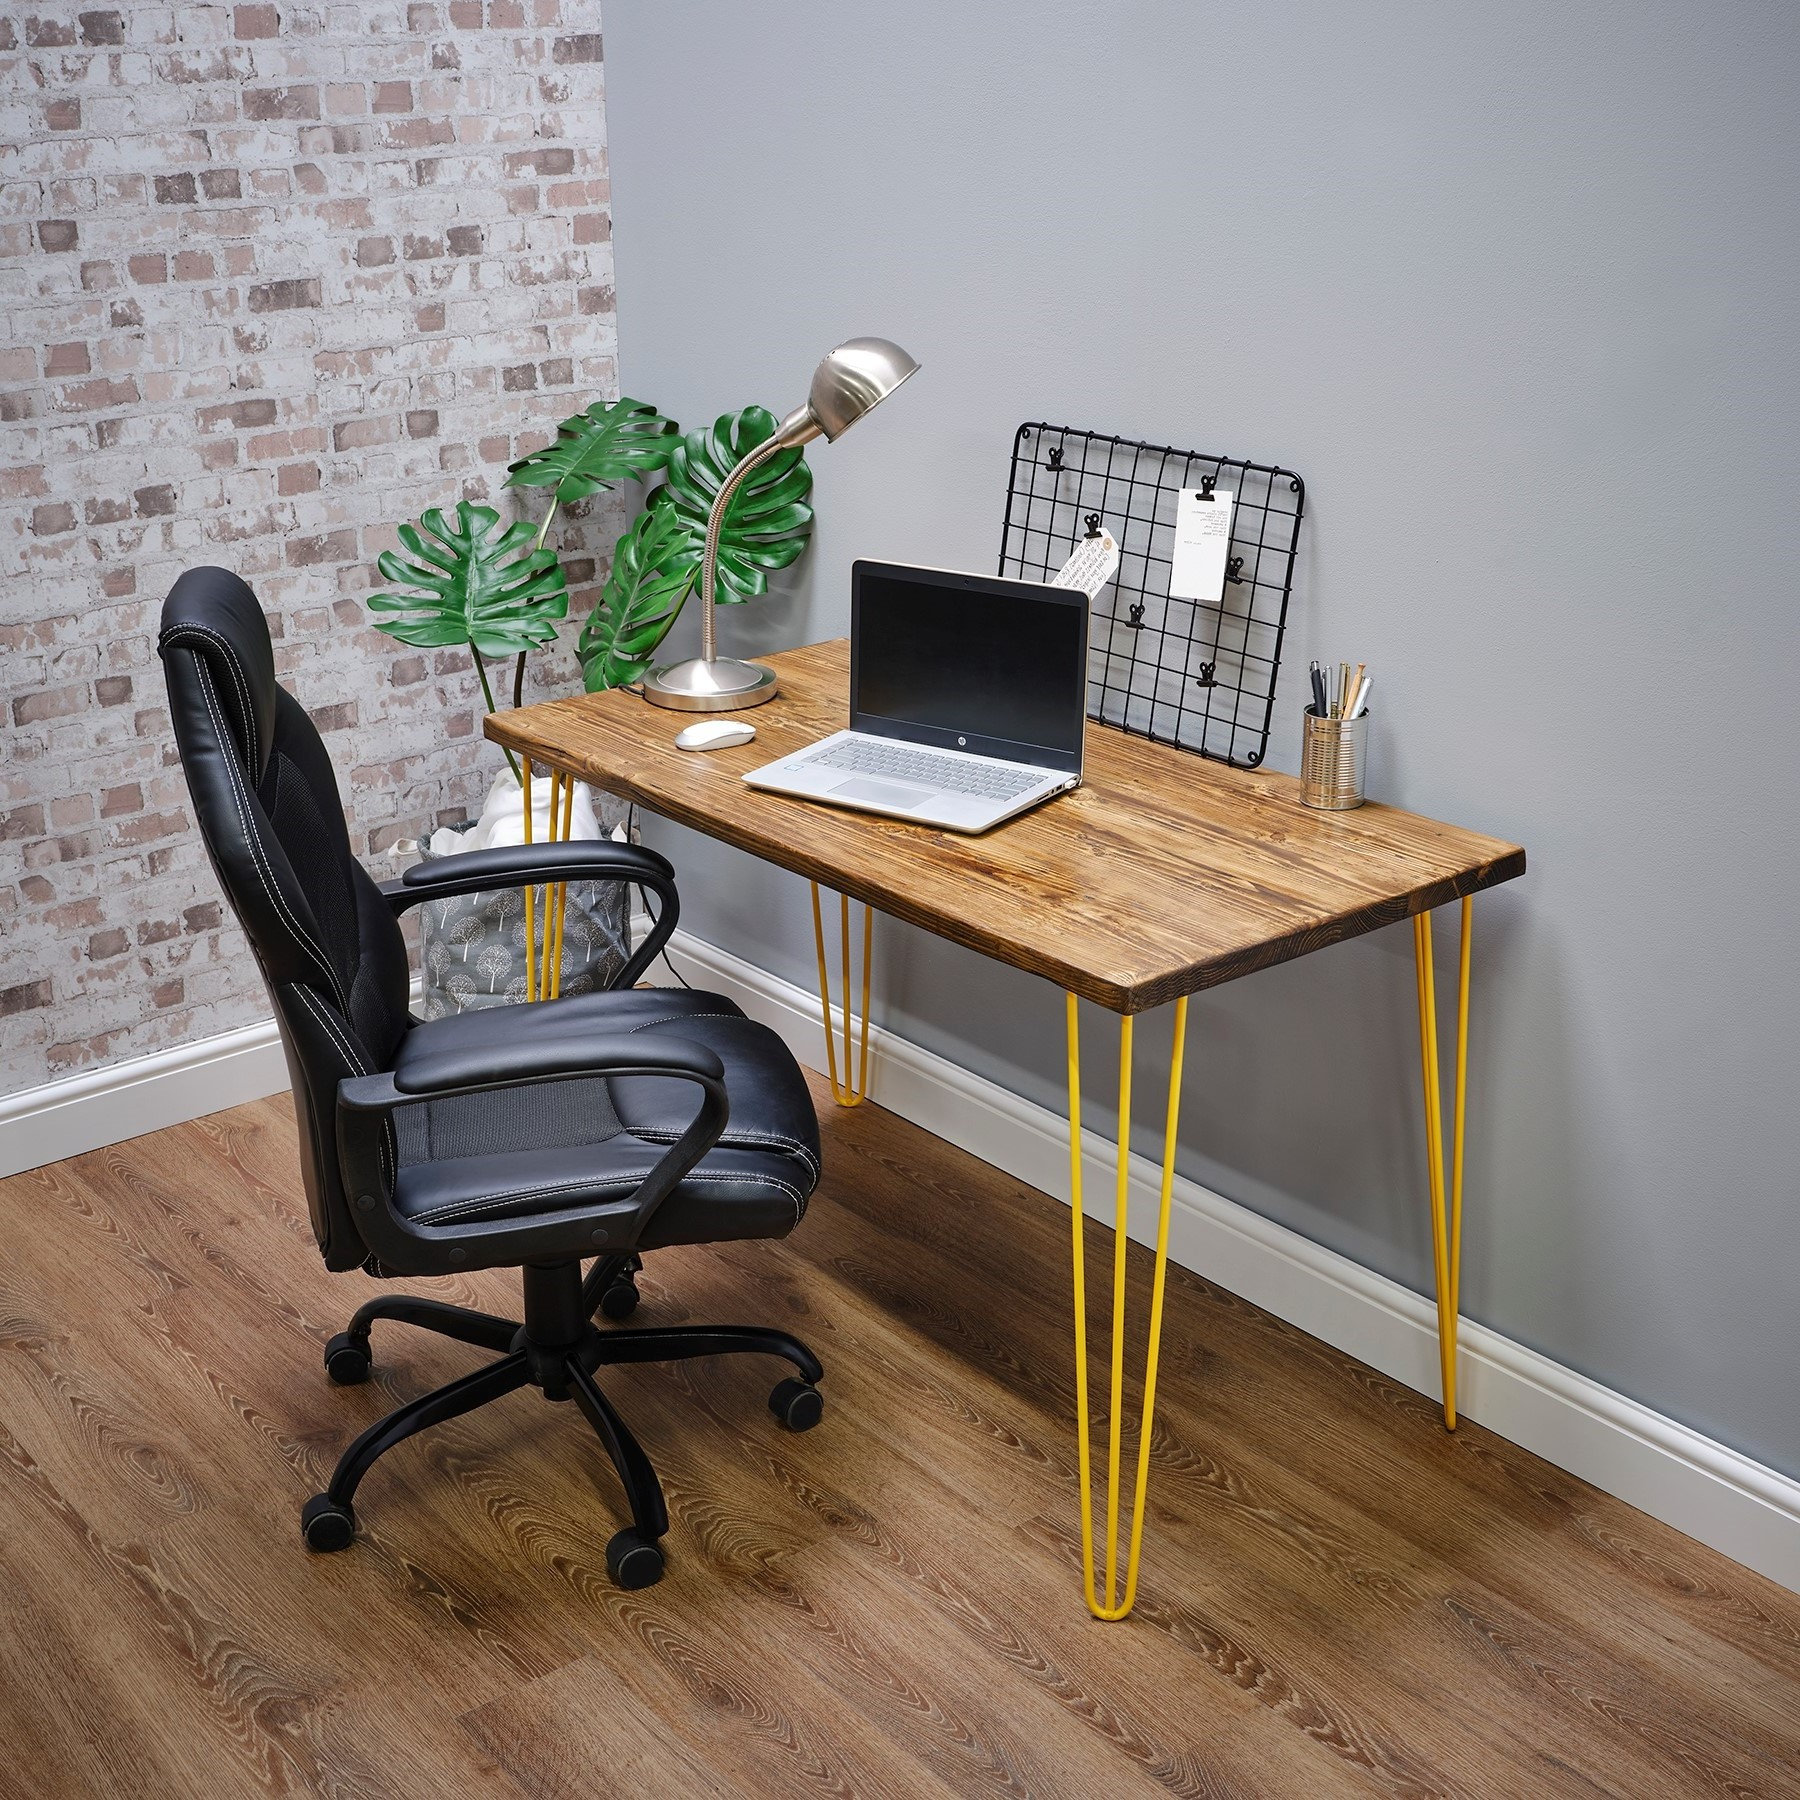 Look, Modern Industrial Desk Reclaimed With Desk Wood Etsy Rustic - Stand Westerton Monitor Desk and a Wooden